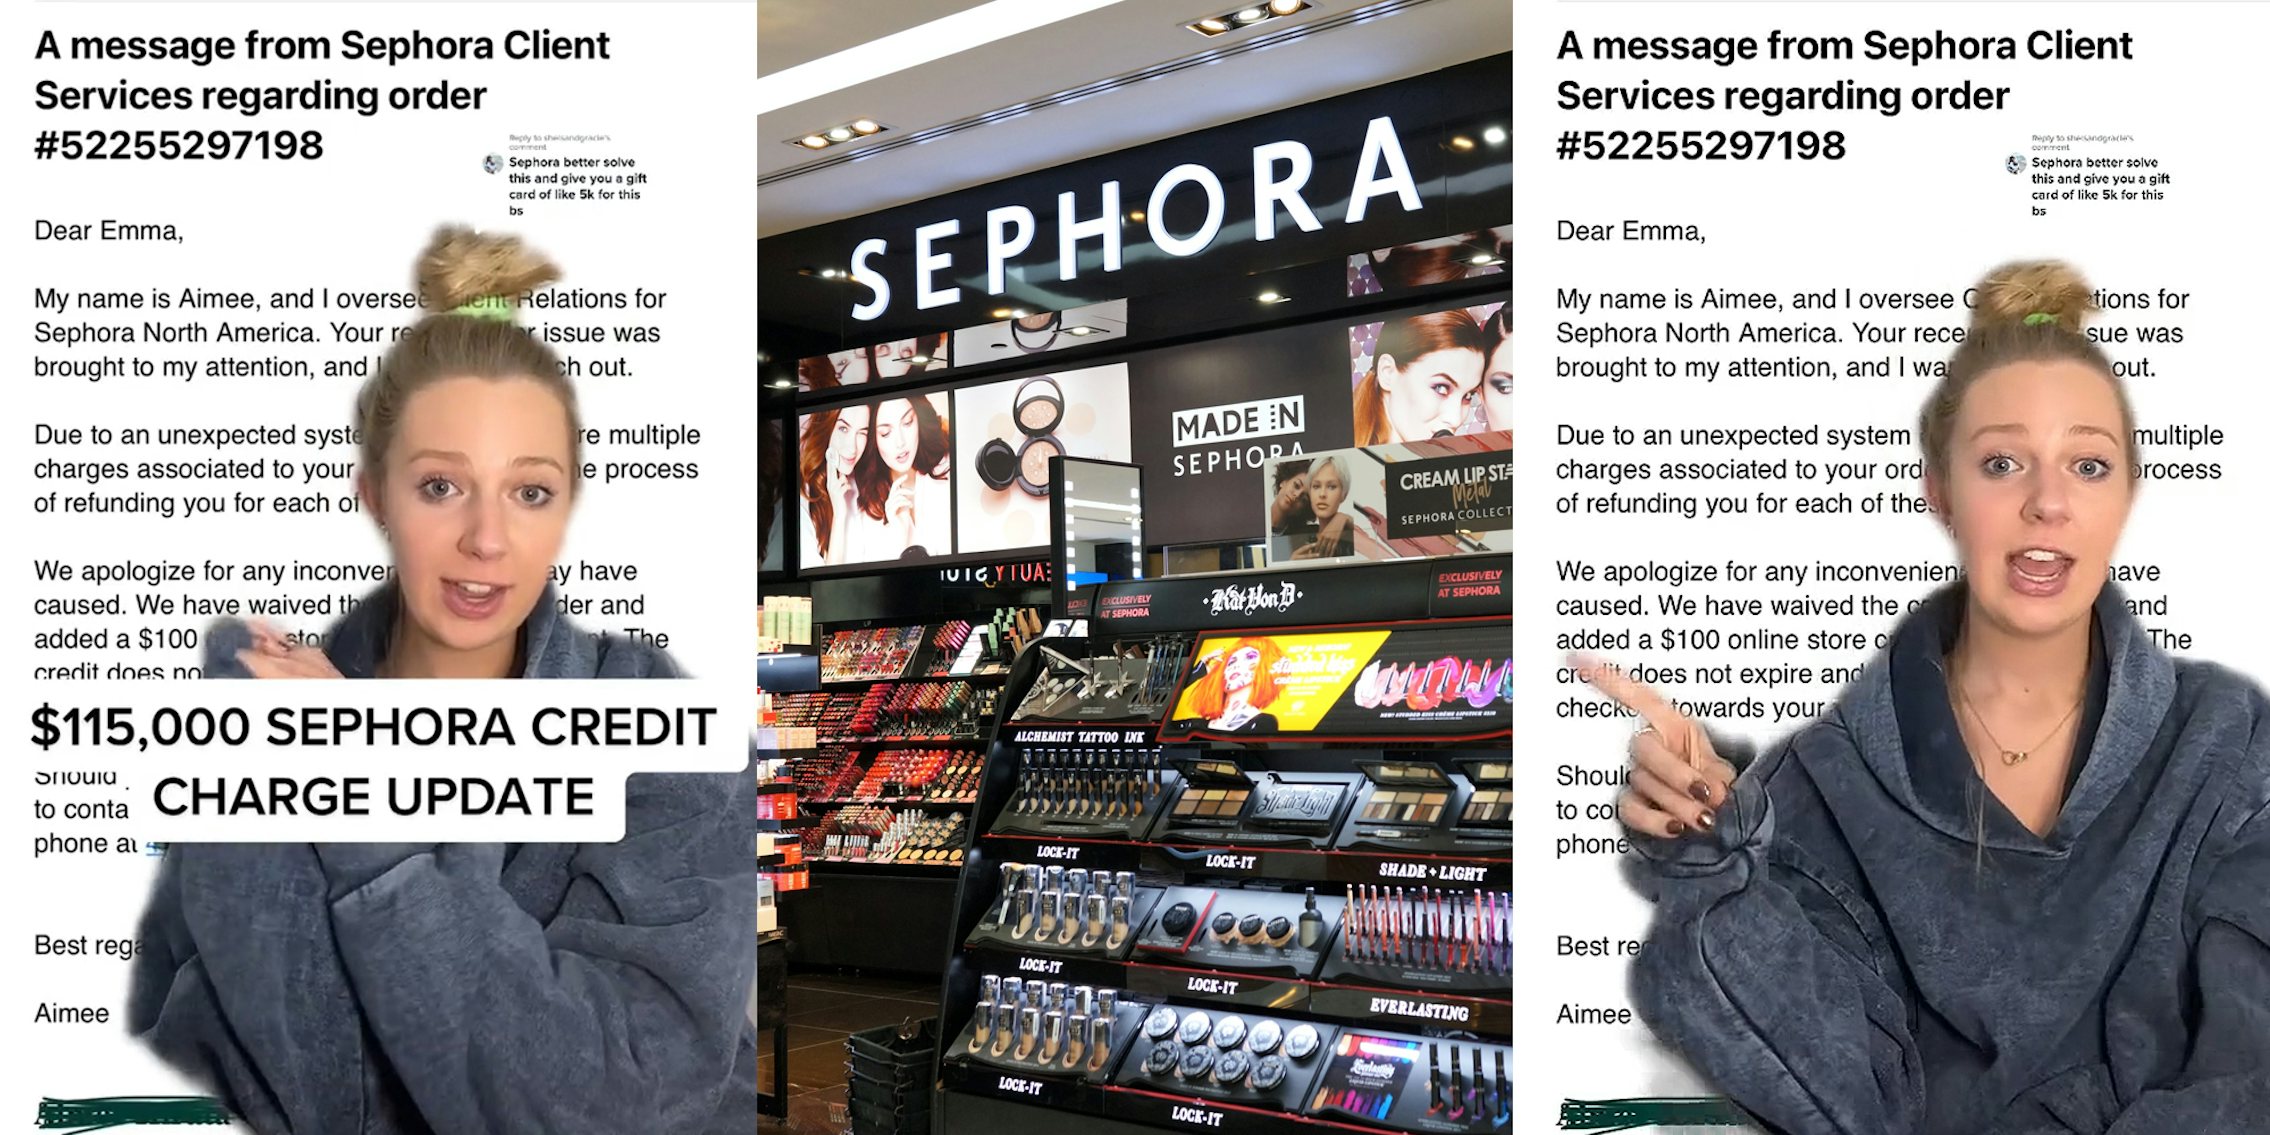 woman greenscreen TikTok over 'A message from Sephora Client Services' email caption '$115,000 SEPHORA CREDIT CHARGE UPDATE' (l) Sephora interior with makeup and sign (c) woman greenscreen TikTok over 'A message from Sephora Client Services' email (r)